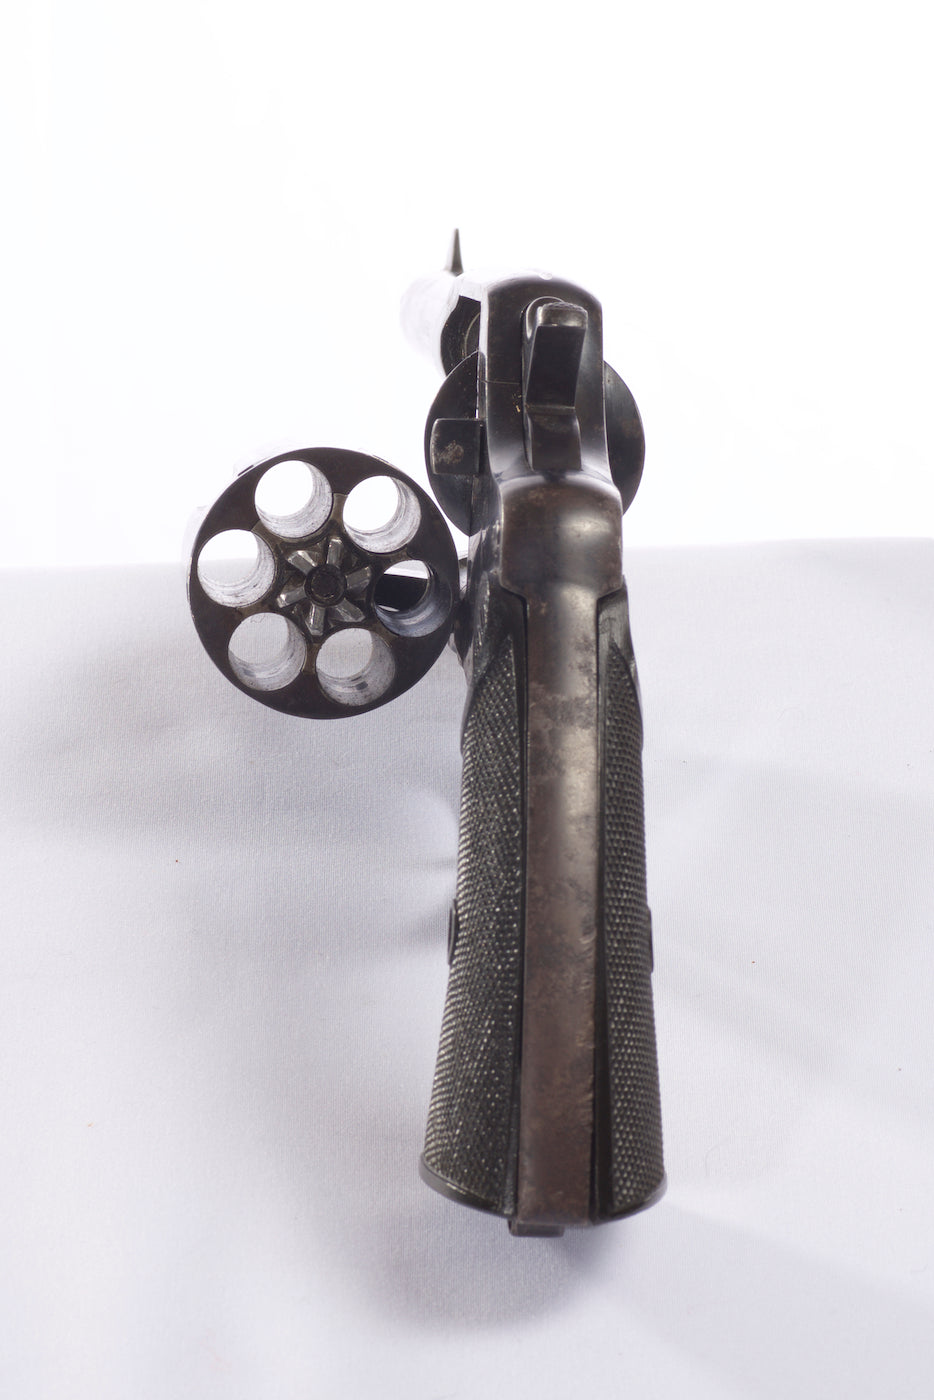 Early Colt "New Service" 38-40 revolver - 1905